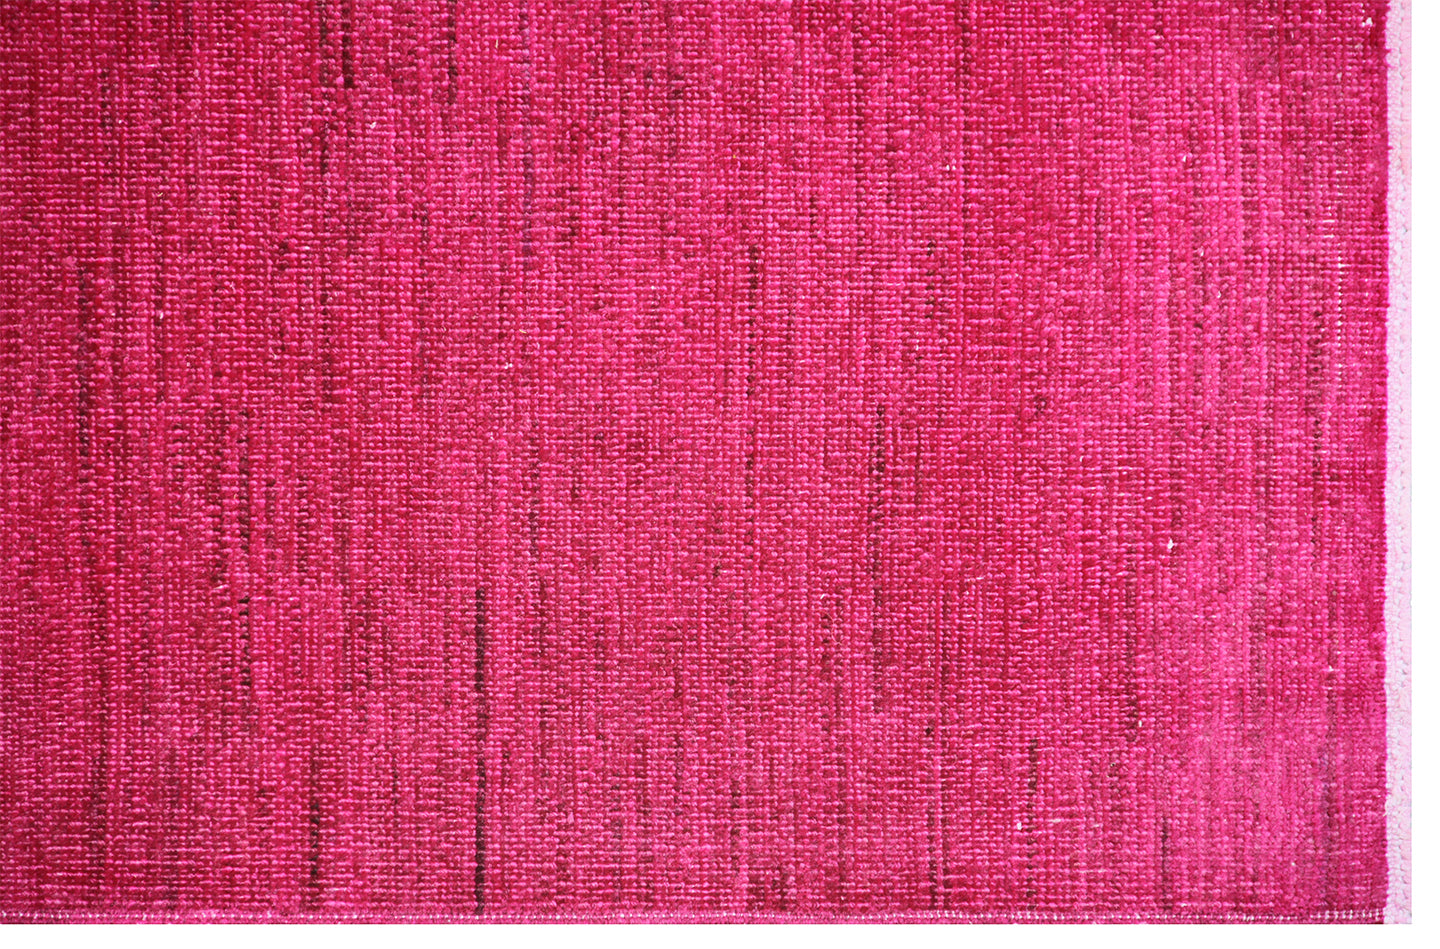 10'x6' Solid Hot Pink Hand-Knotted Ariana Over-dye Area Rug